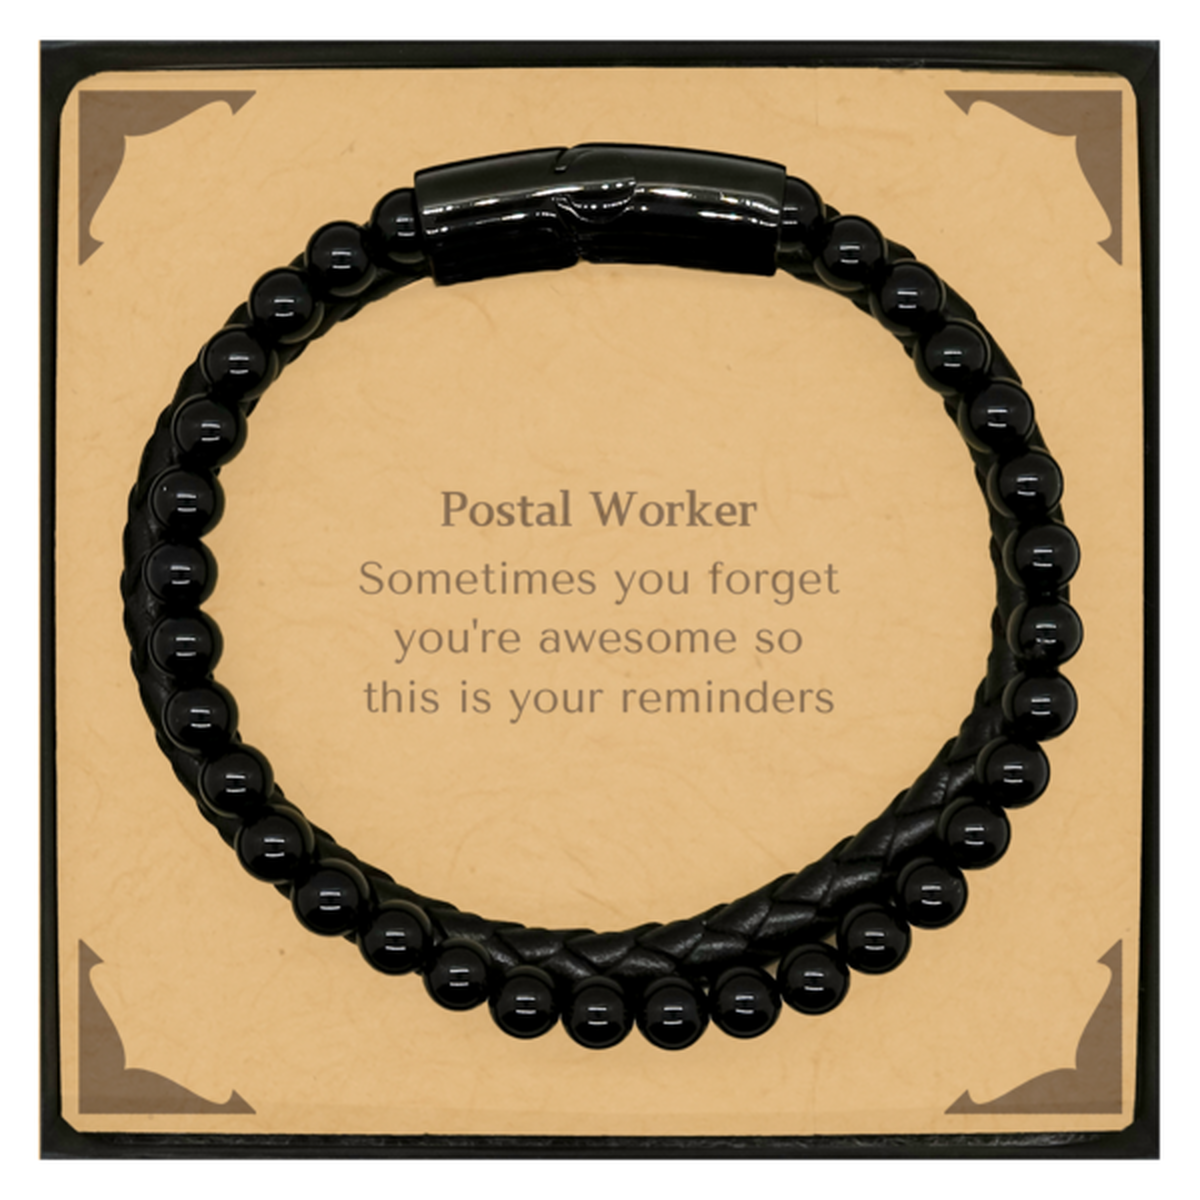 Sentimental Postal Worker Stone Leather Bracelets, Postal Worker Sometimes you forget you're awesome so this is your reminders, Graduation Christmas Birthday Gifts for Postal Worker, Men, Women, Coworkers